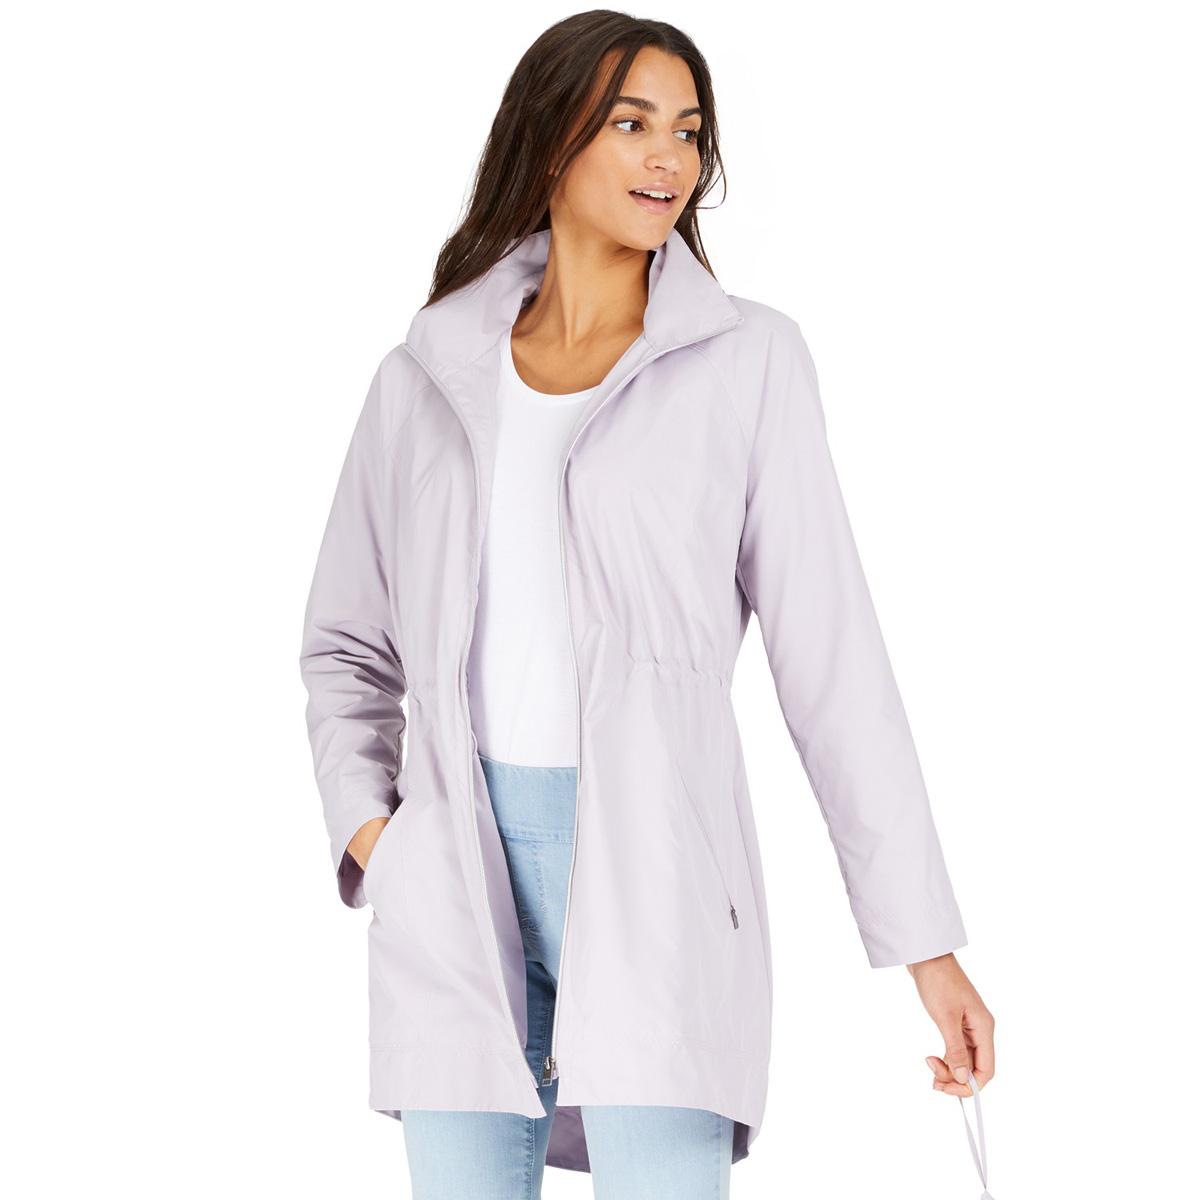 Womens Hooded Anorak Jacket for $19.08